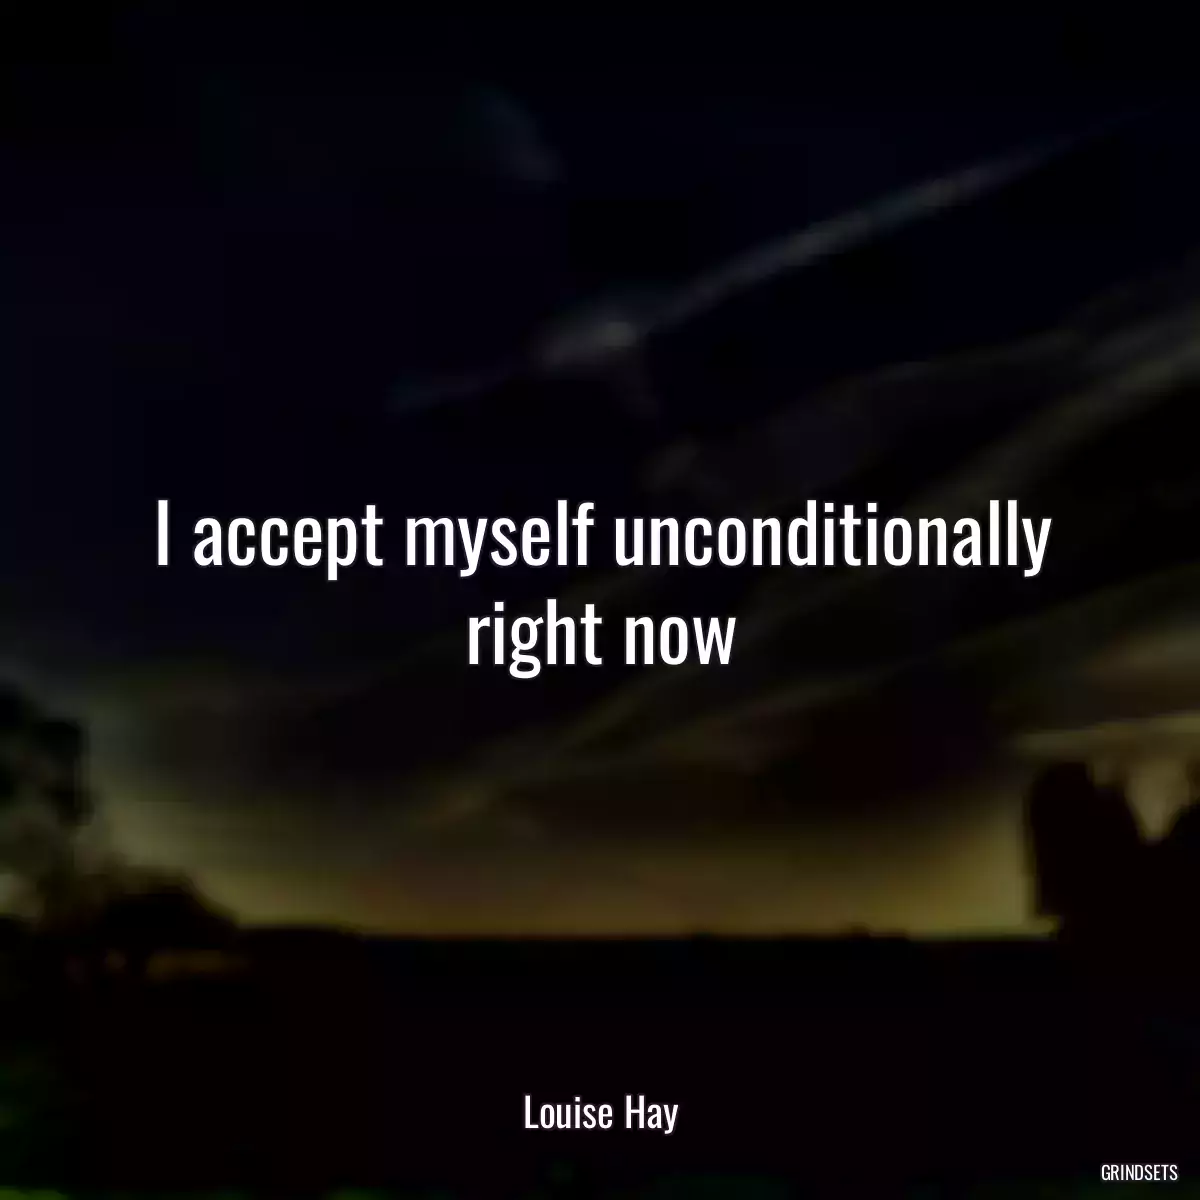 I accept myself unconditionally right now